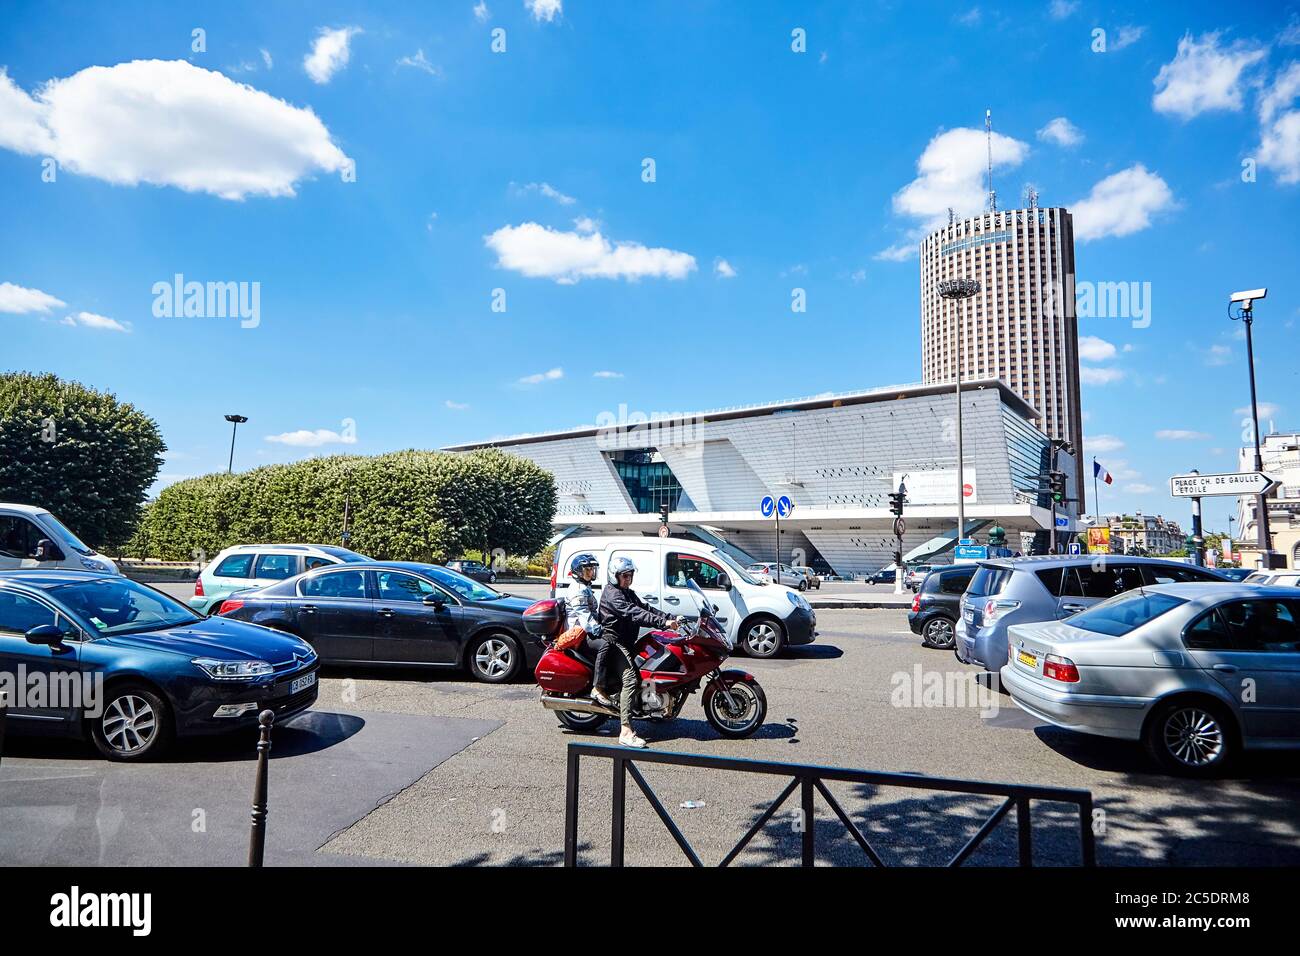 Paris, France - June 19, 2015: Standing transport on the city street. Motorcycle and cars Stock Photo